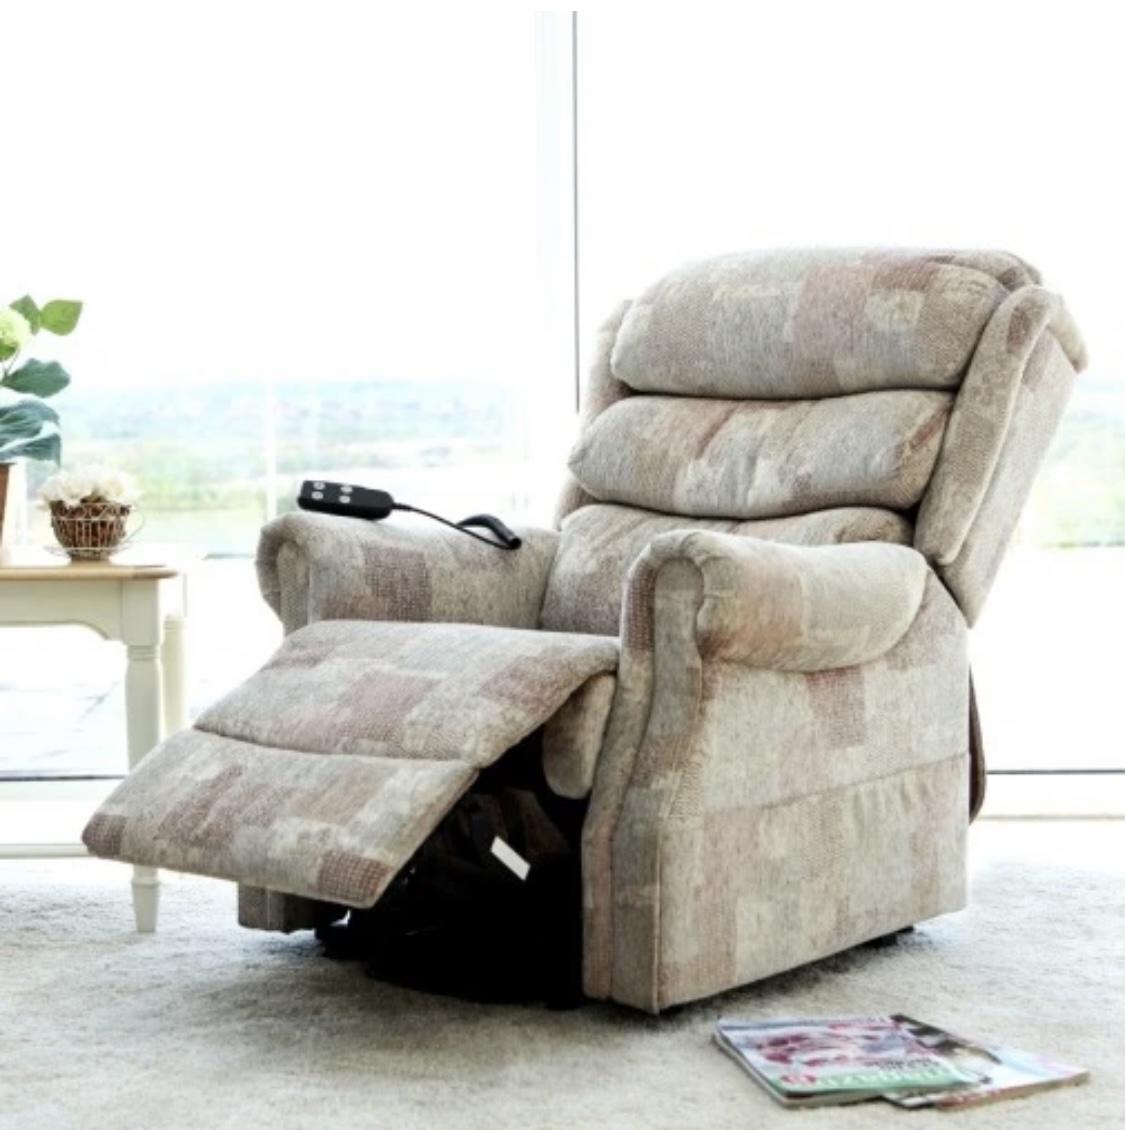 GFA Lincoln rise and recline chair